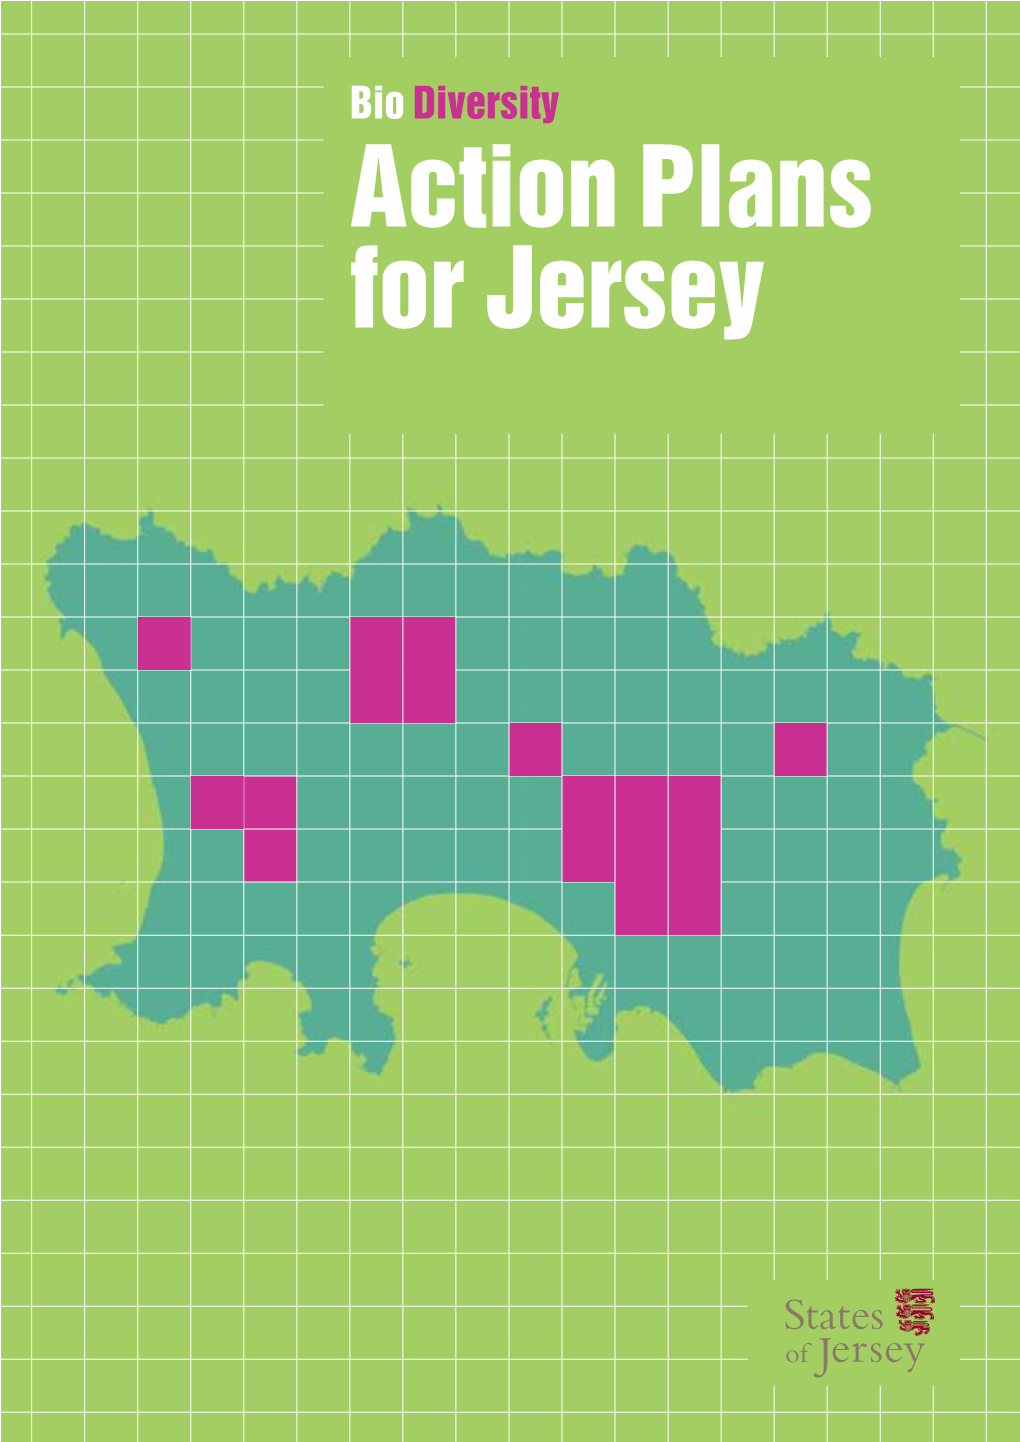 Biodiversity Action Plans Will Help Bring About Positive Change in Jersey